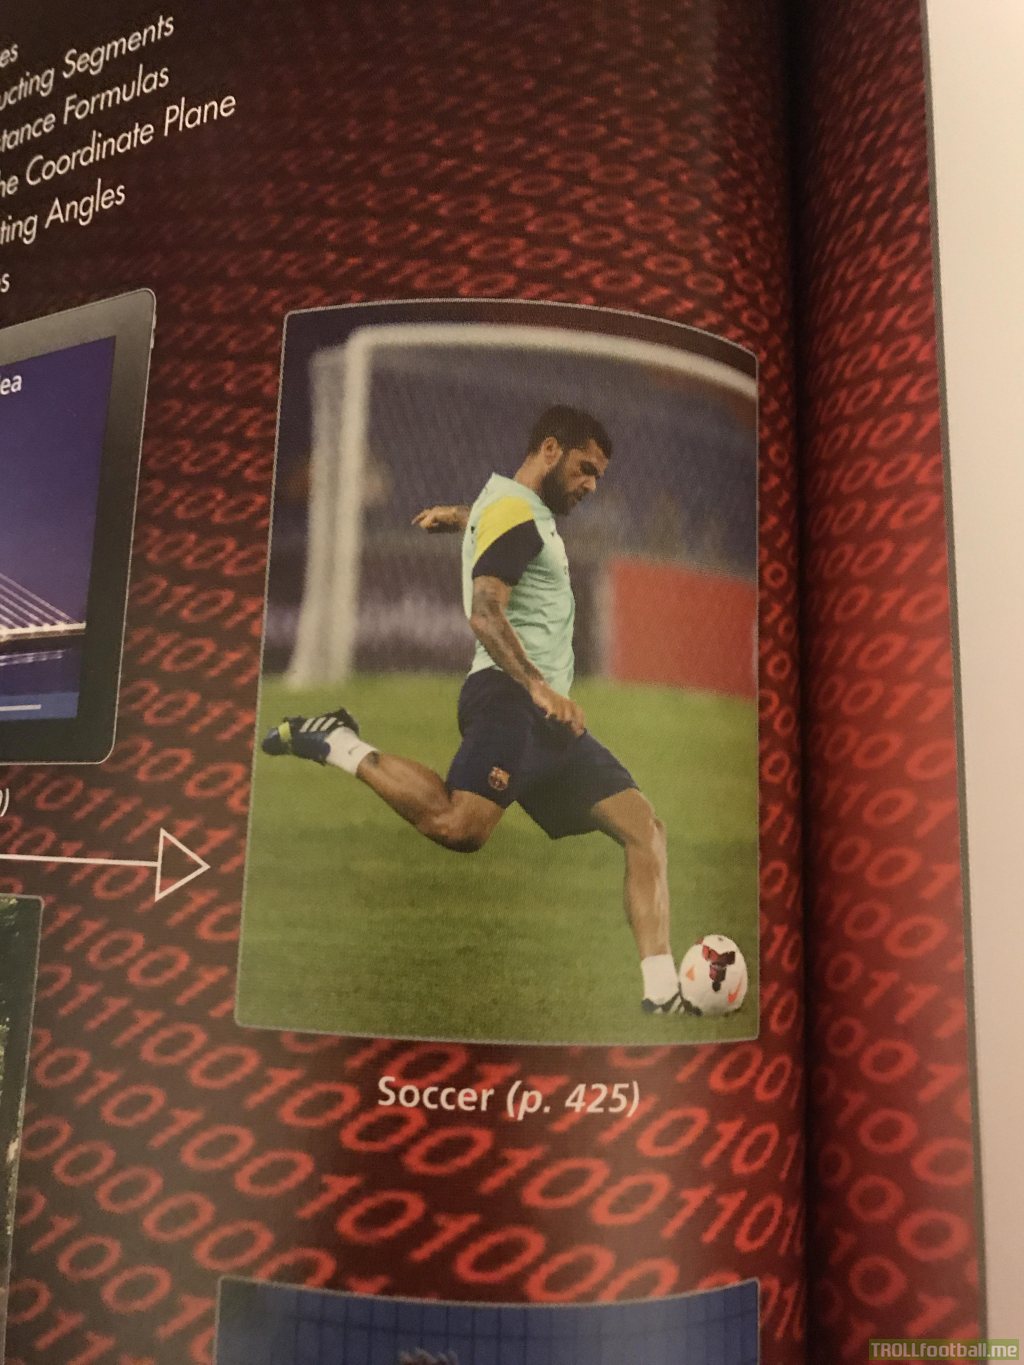 Dani Alves is in my little sisters math book